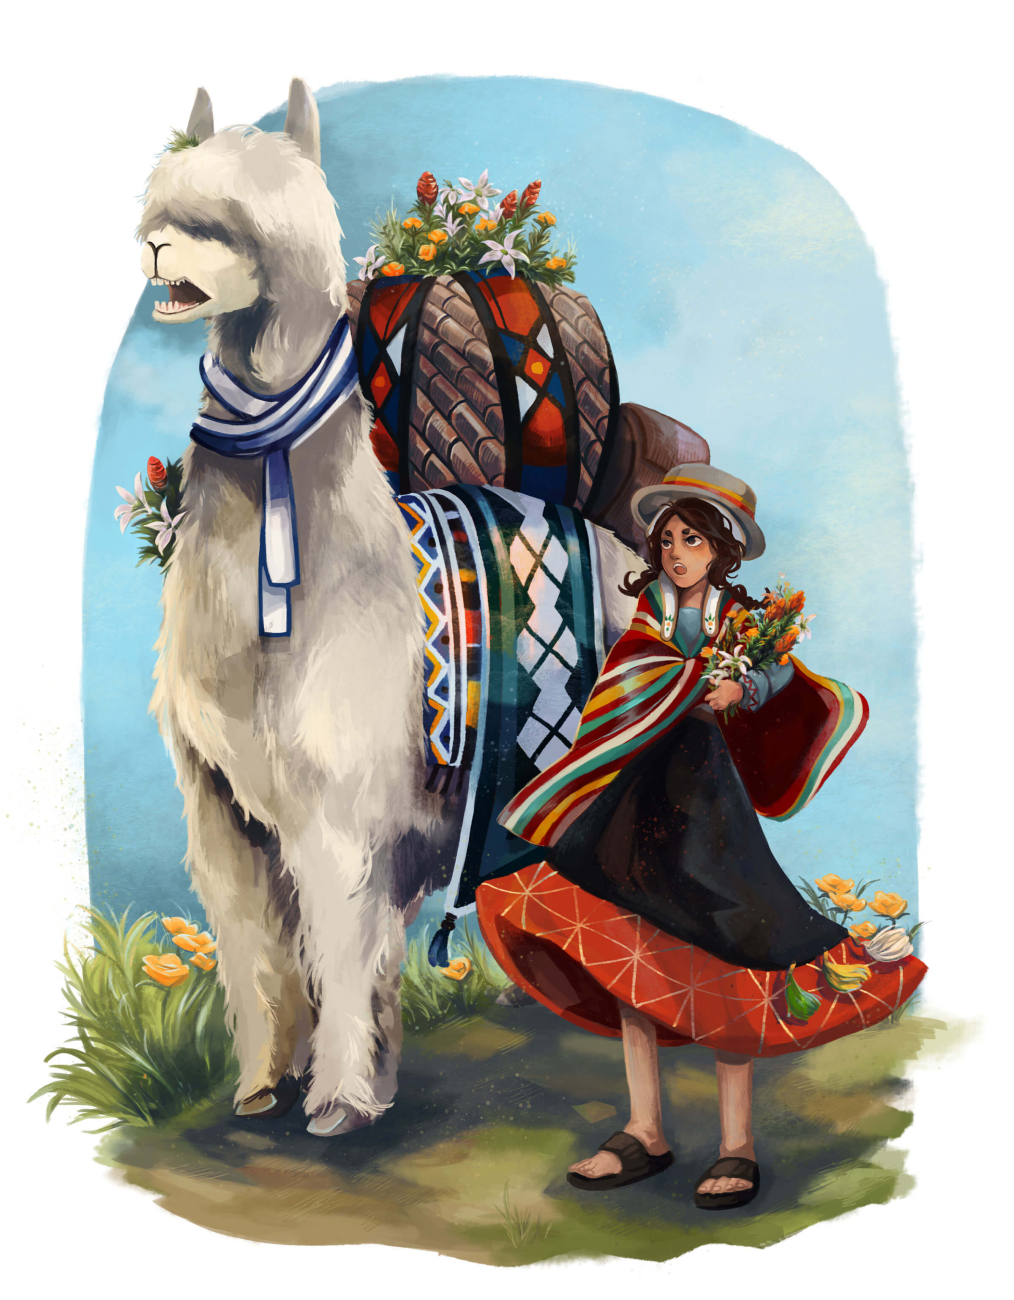 An open-mouthed girl and her llama, both in traditional dress